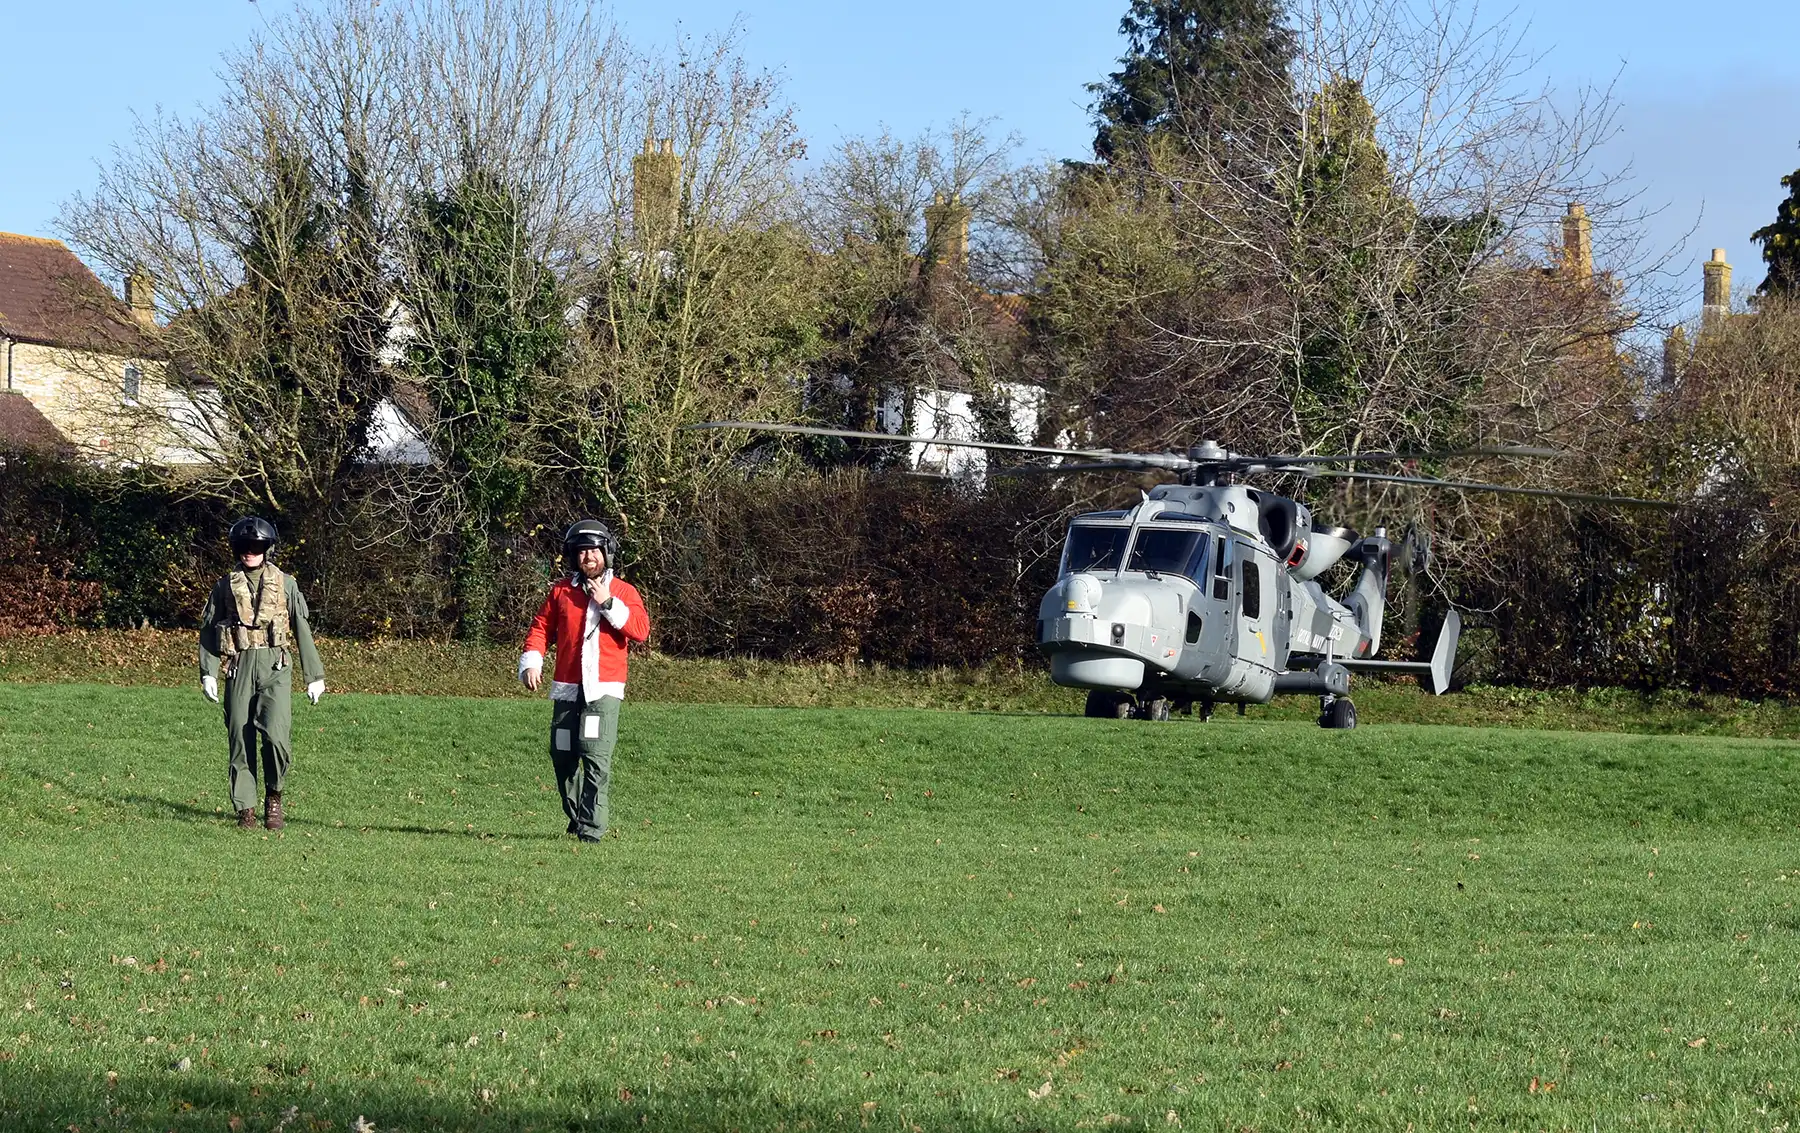 Sherborne Primary School pupils were surprised by the helicopter visit - with Santa on board!